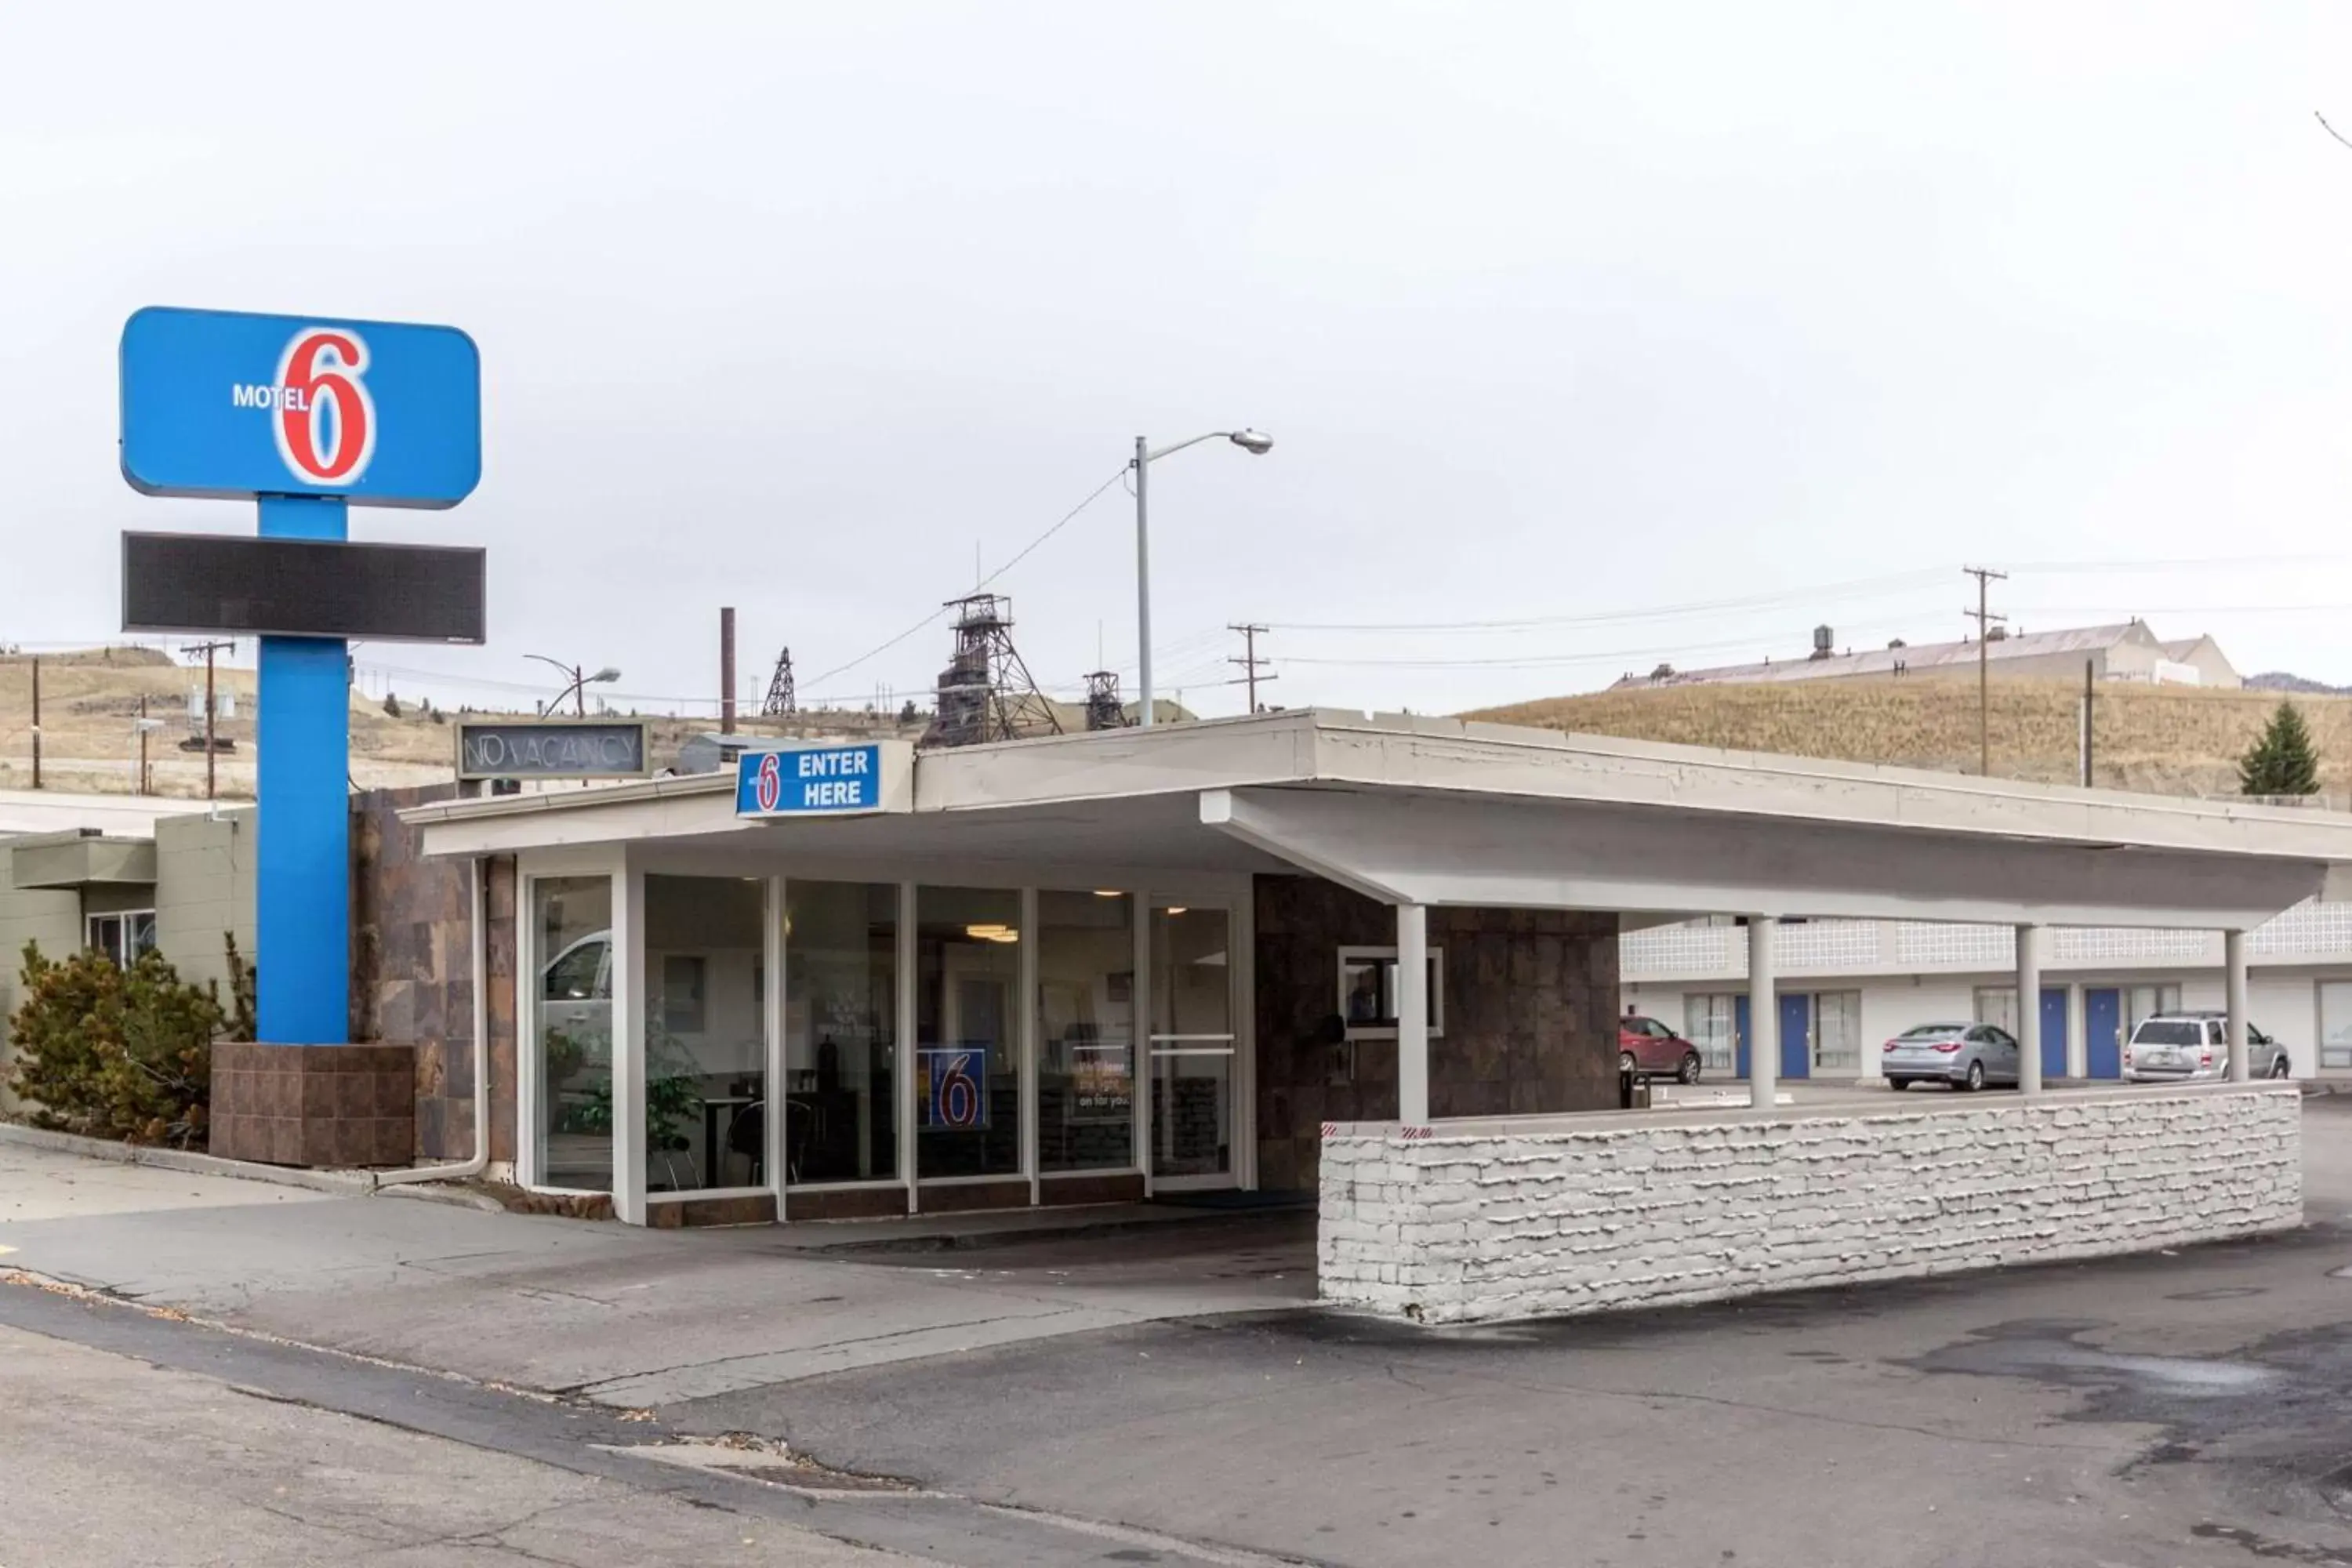 Property building in Motel 6-Butte, MT - Historic City Center